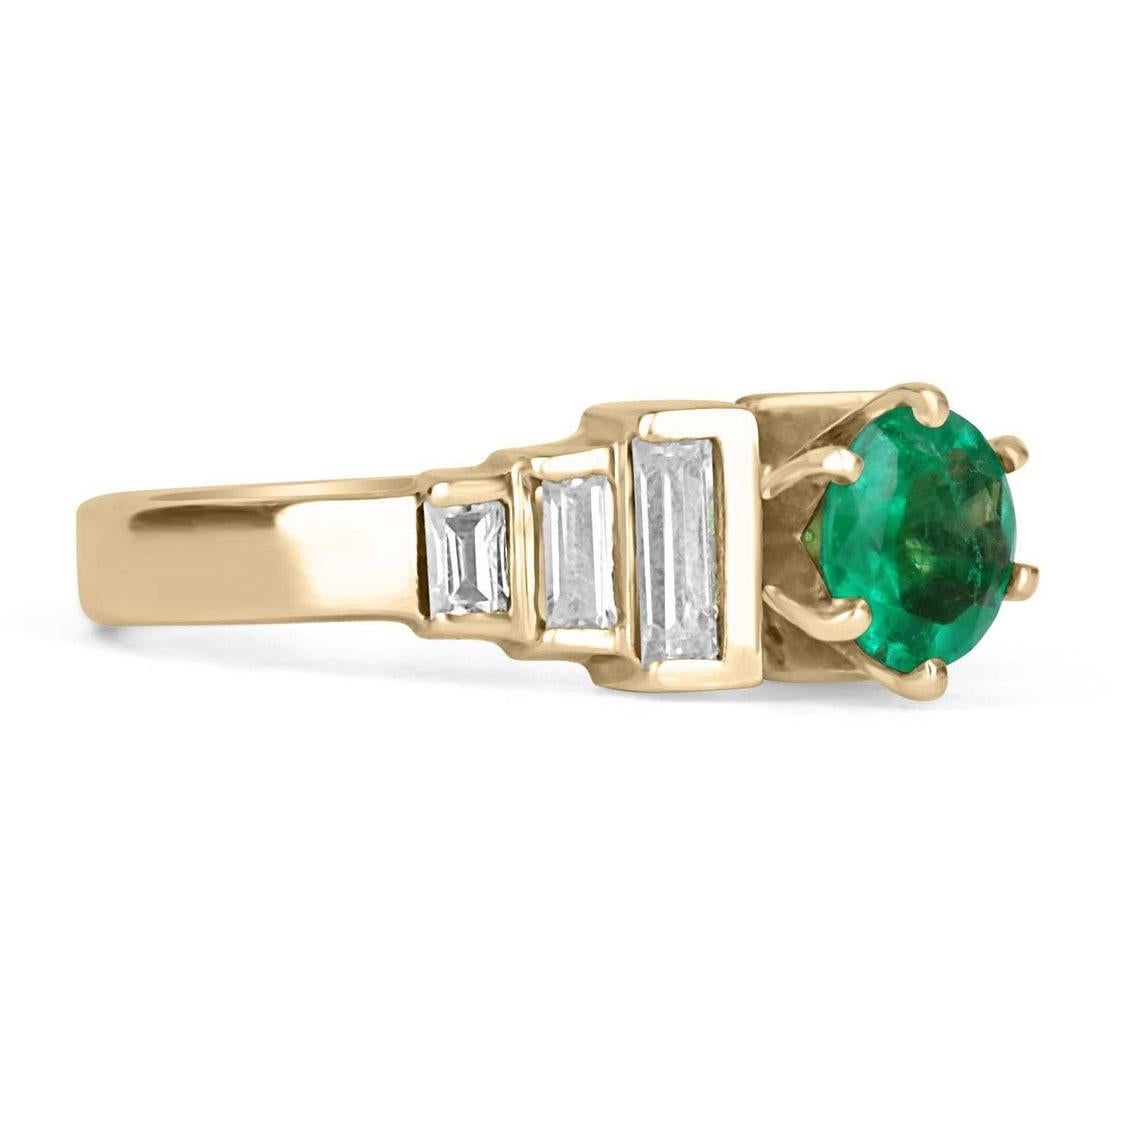 A fantastic, top-quality earth-mined round Colombian emerald and emerald cut diamond engagement ring. Handcrafted in ever luxurious solid 14k, this ring features a breathtaking round-cut Colombian emerald that weighs 1.0cts and is set in a classic 6